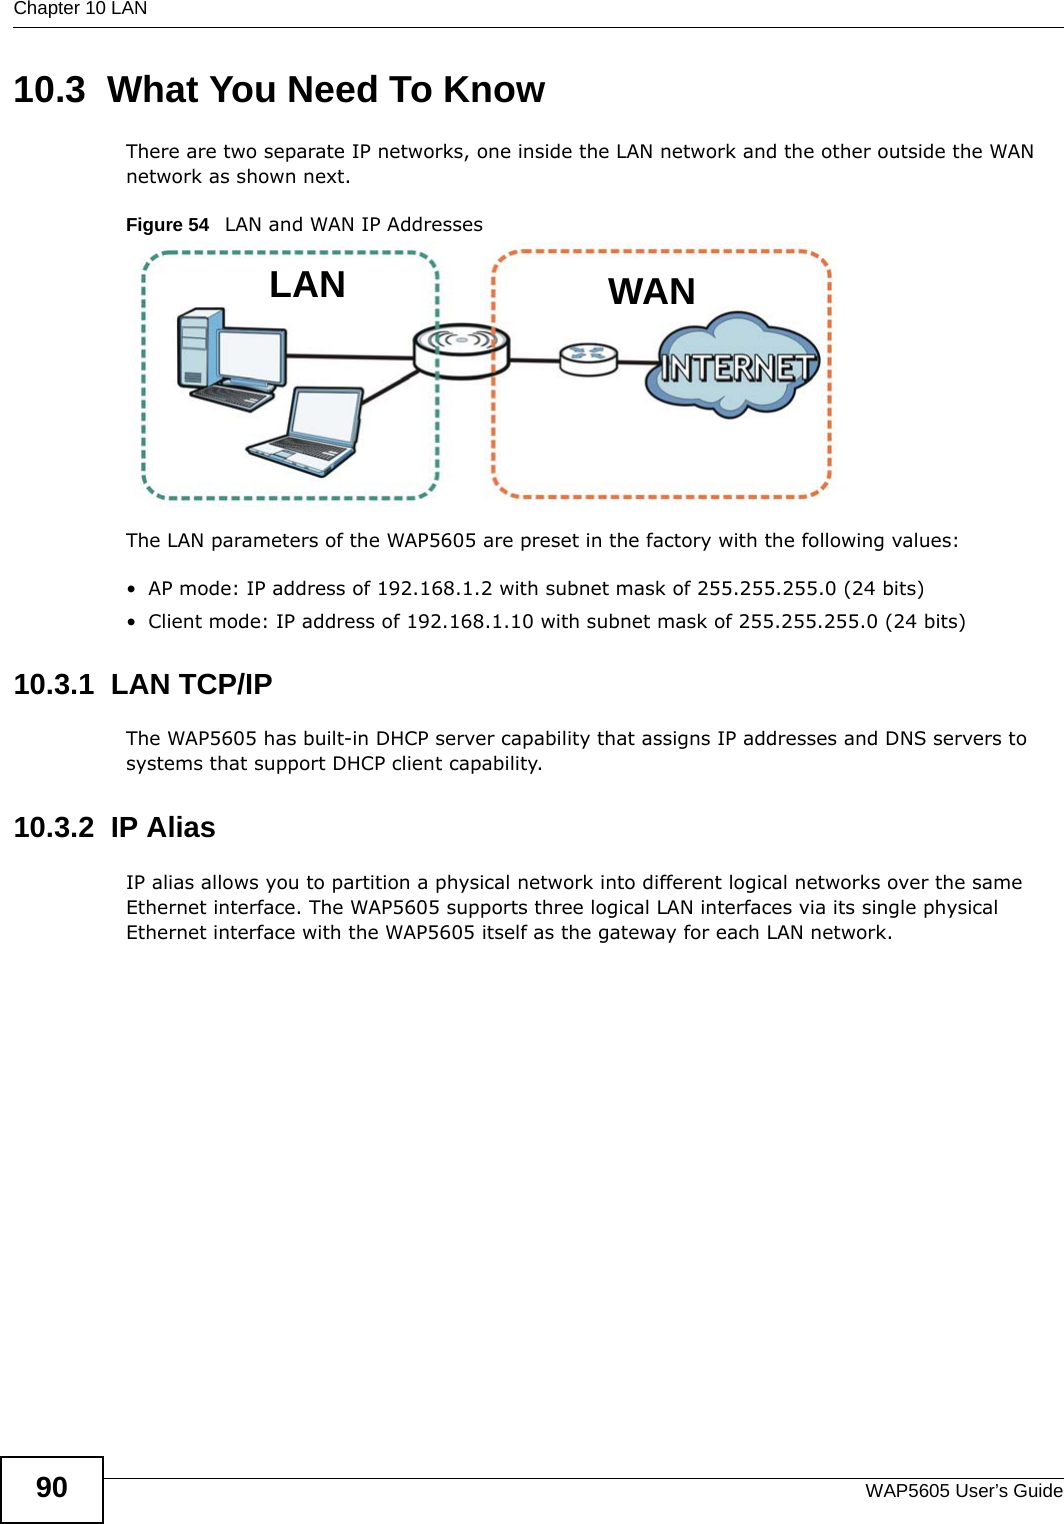 Chapter 10 LANWAP5605 User’s Guide9010.3  What You Need To KnowThere are two separate IP networks, one inside the LAN network and the other outside the WAN network as shown next.Figure 54   LAN and WAN IP AddressesThe LAN parameters of the WAP5605 are preset in the factory with the following values:• AP mode: IP address of 192.168.1.2 with subnet mask of 255.255.255.0 (24 bits)• Client mode: IP address of 192.168.1.10 with subnet mask of 255.255.255.0 (24 bits)10.3.1  LAN TCP/IP The WAP5605 has built-in DHCP server capability that assigns IP addresses and DNS servers to systems that support DHCP client capability.10.3.2  IP AliasIP alias allows you to partition a physical network into different logical networks over the same Ethernet interface. The WAP5605 supports three logical LAN interfaces via its single physical Ethernet interface with the WAP5605 itself as the gateway for each LAN network.WANLAN